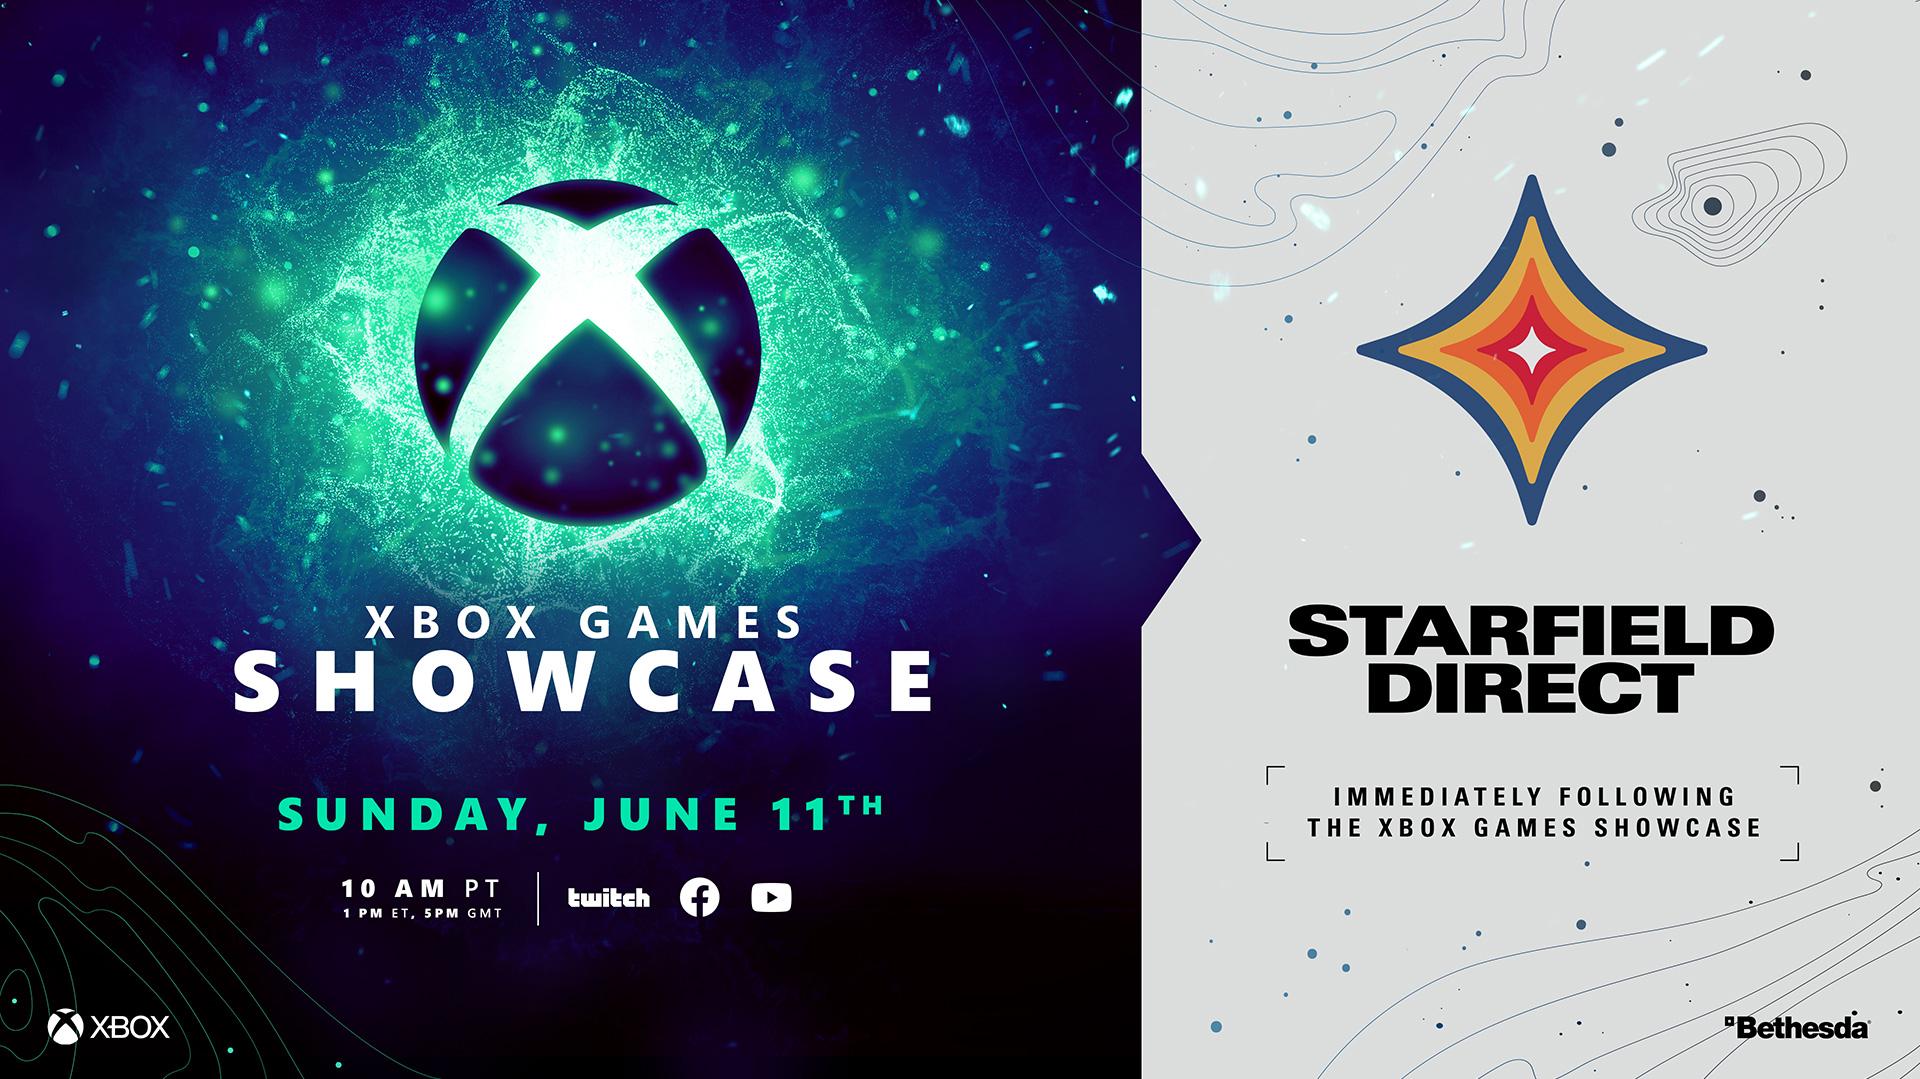 Get Ready For The Xbox Games Showcase And Starfield Direct Double